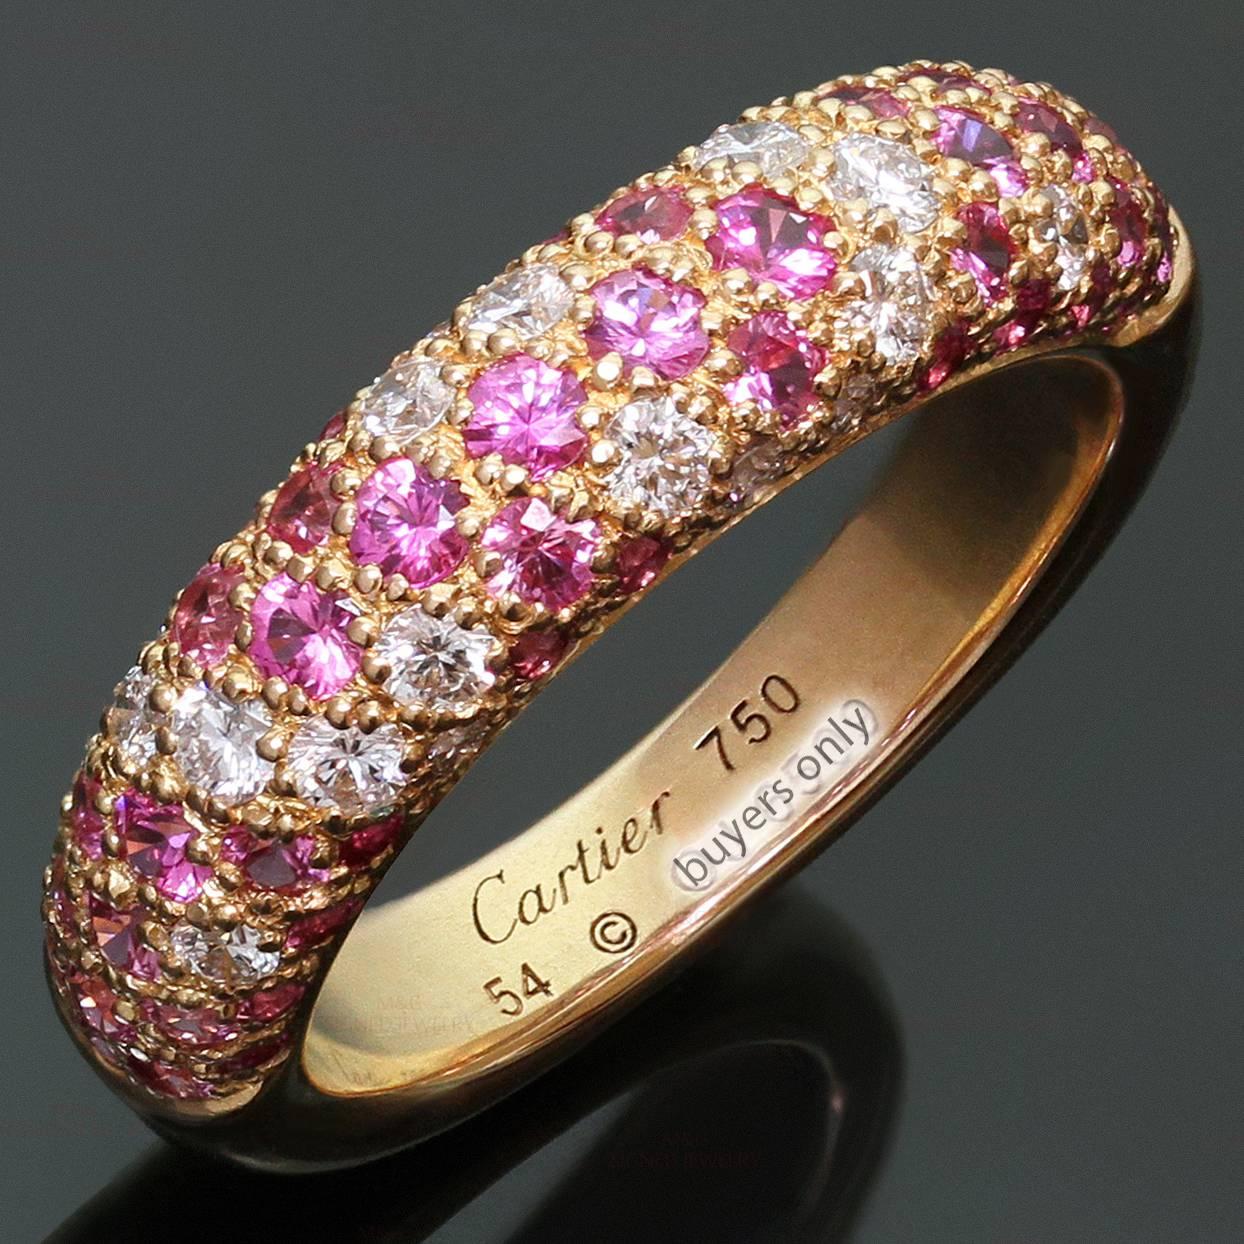 This stunning ring the Étincelle de CARTIER collection is crafted in 18k rose gold and set with sparkling brilliant-cut round diamonds and round faceted pink sapphires. Made in France circa 2000s. Measurements: 0.23" (6mm) width. The ring size